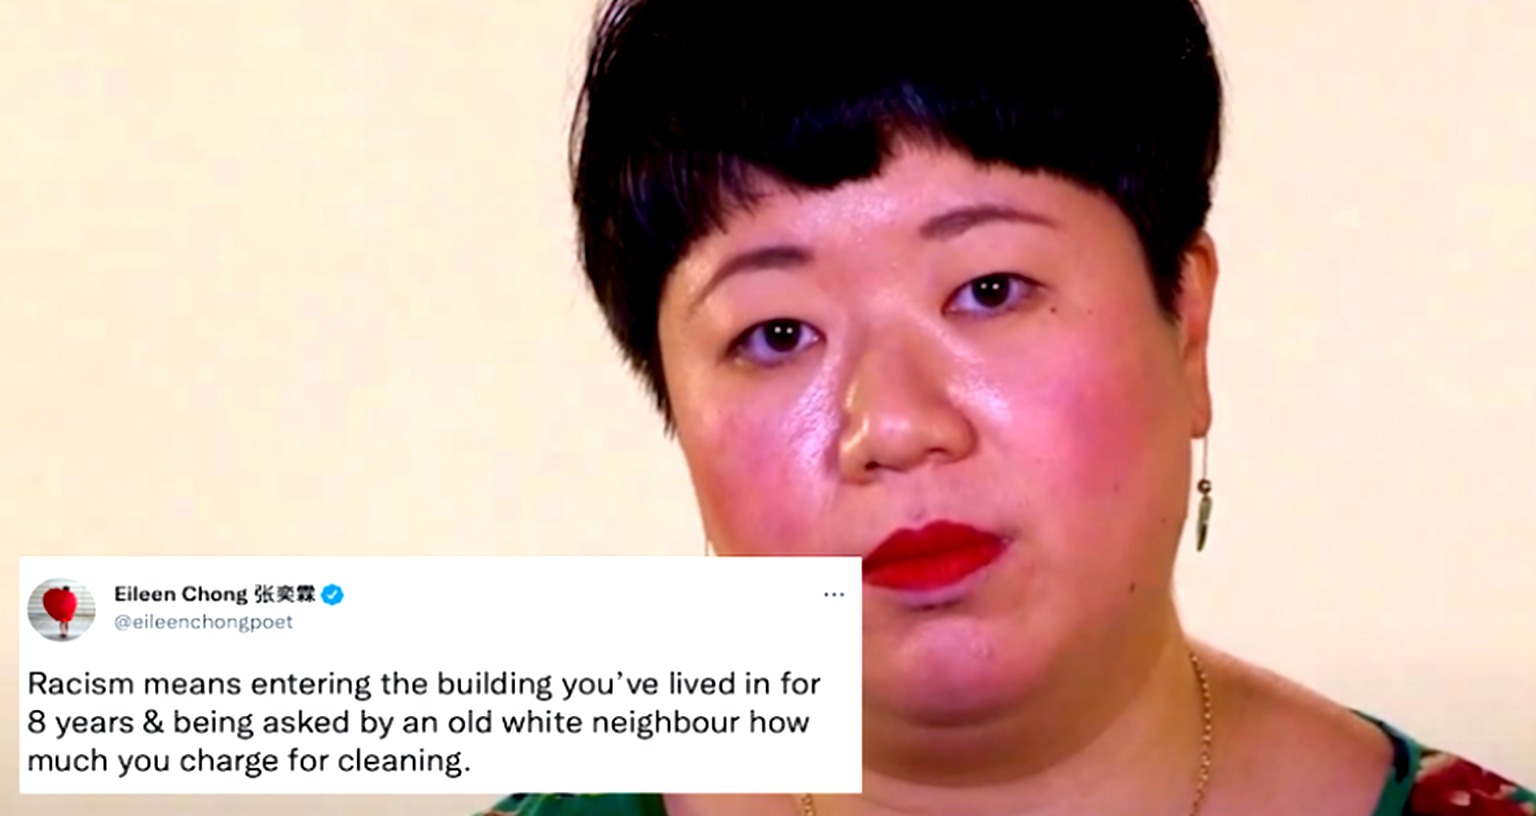 Australian poet Eileen Chong says she was asked a racist question by her white neighbor